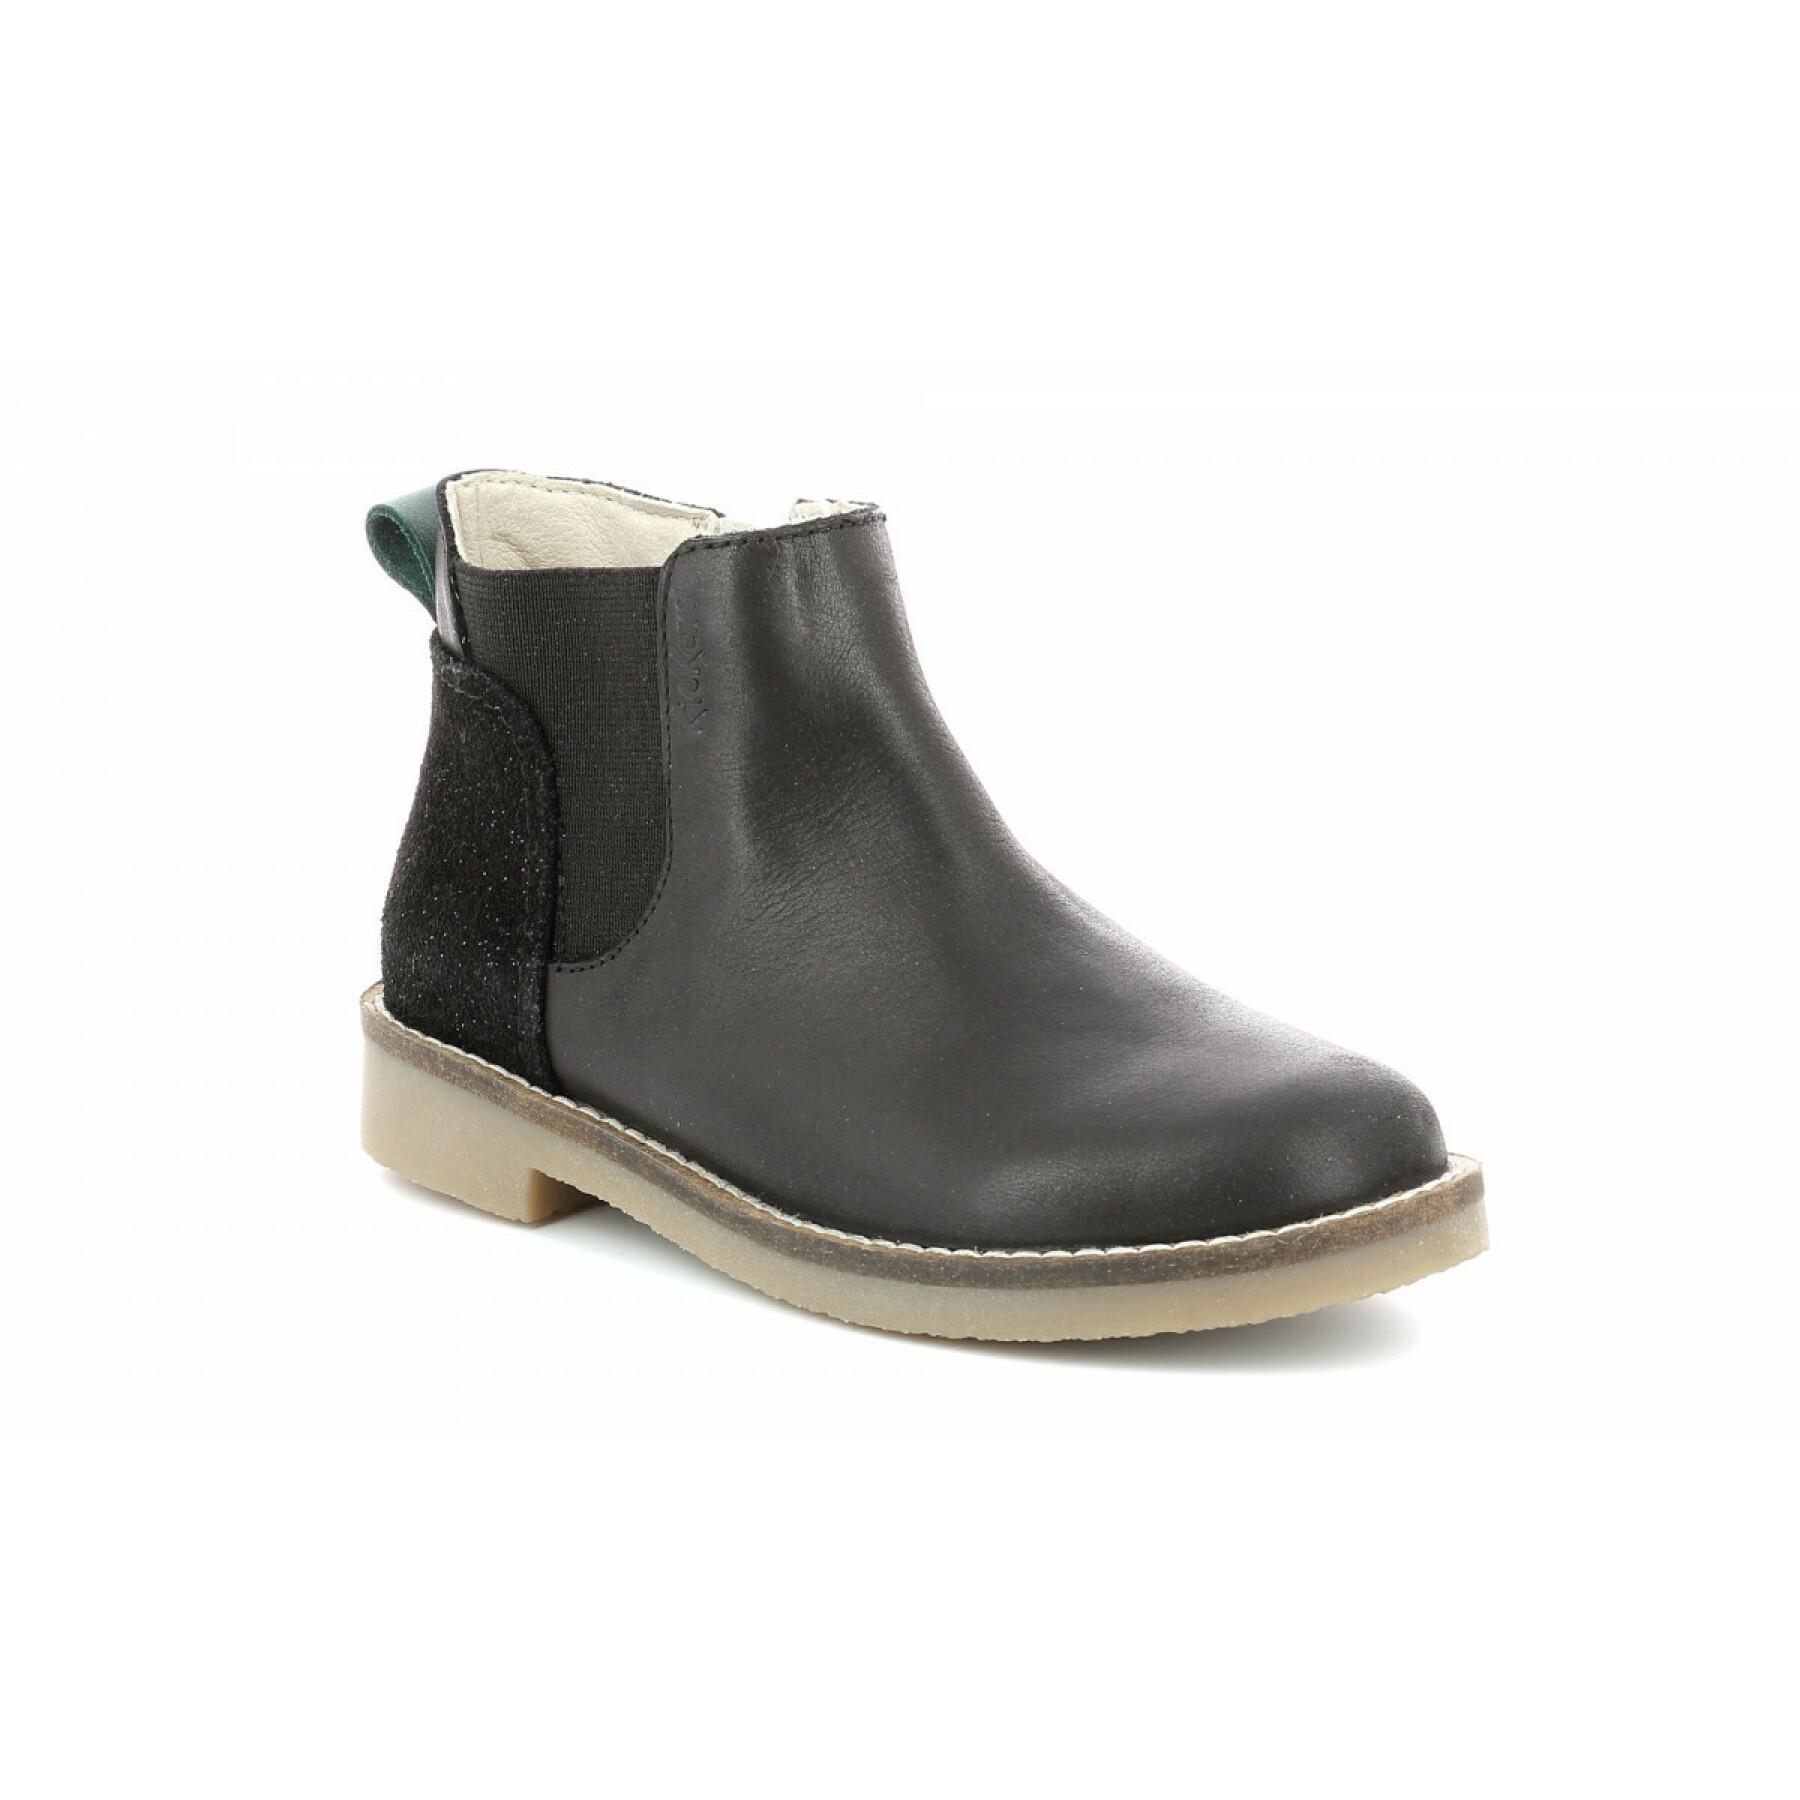 Children's boots Kickers nycco